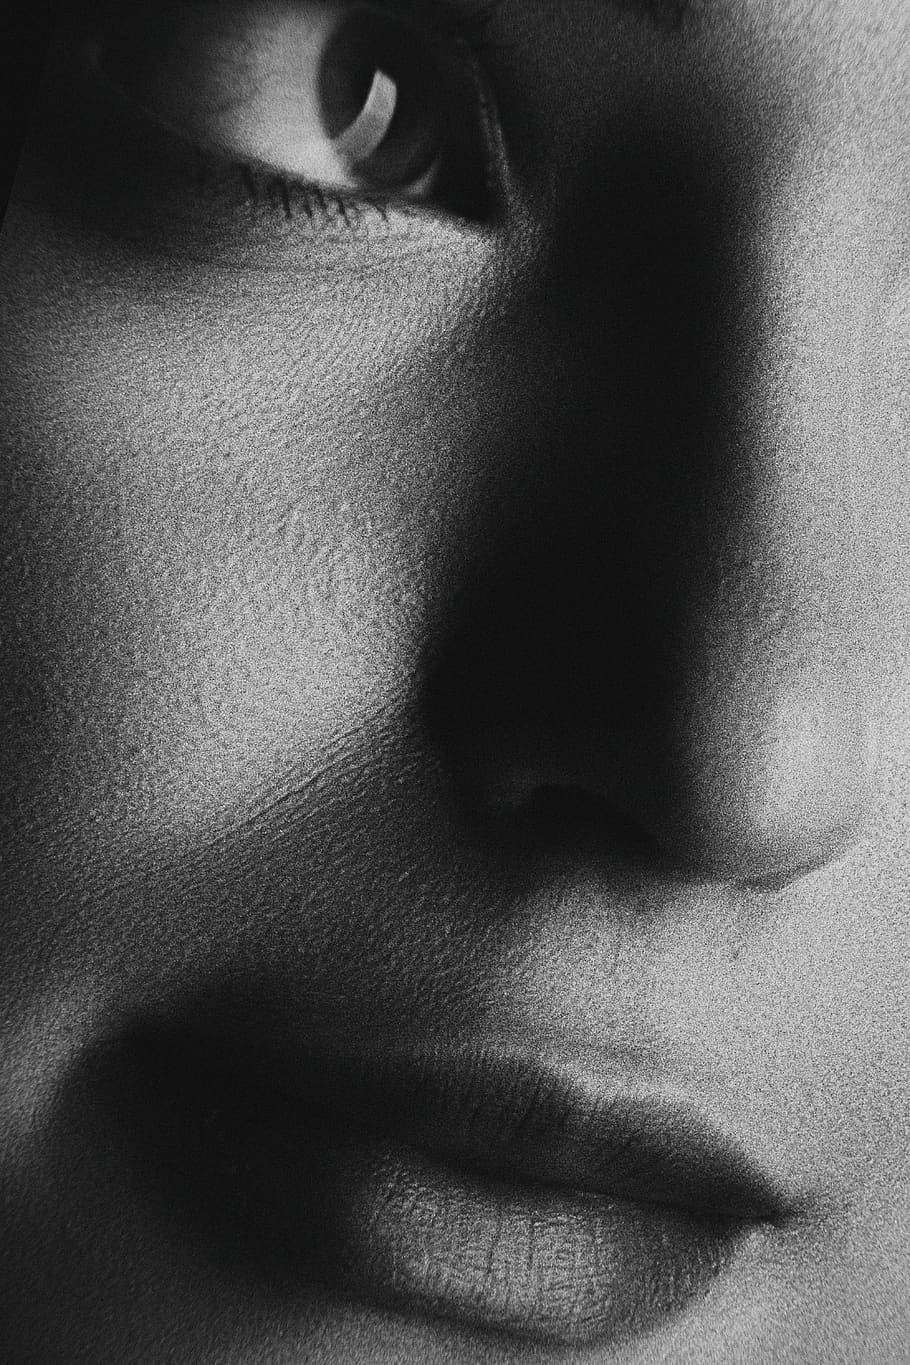 woman's face, human body part, one person, human face, close-up